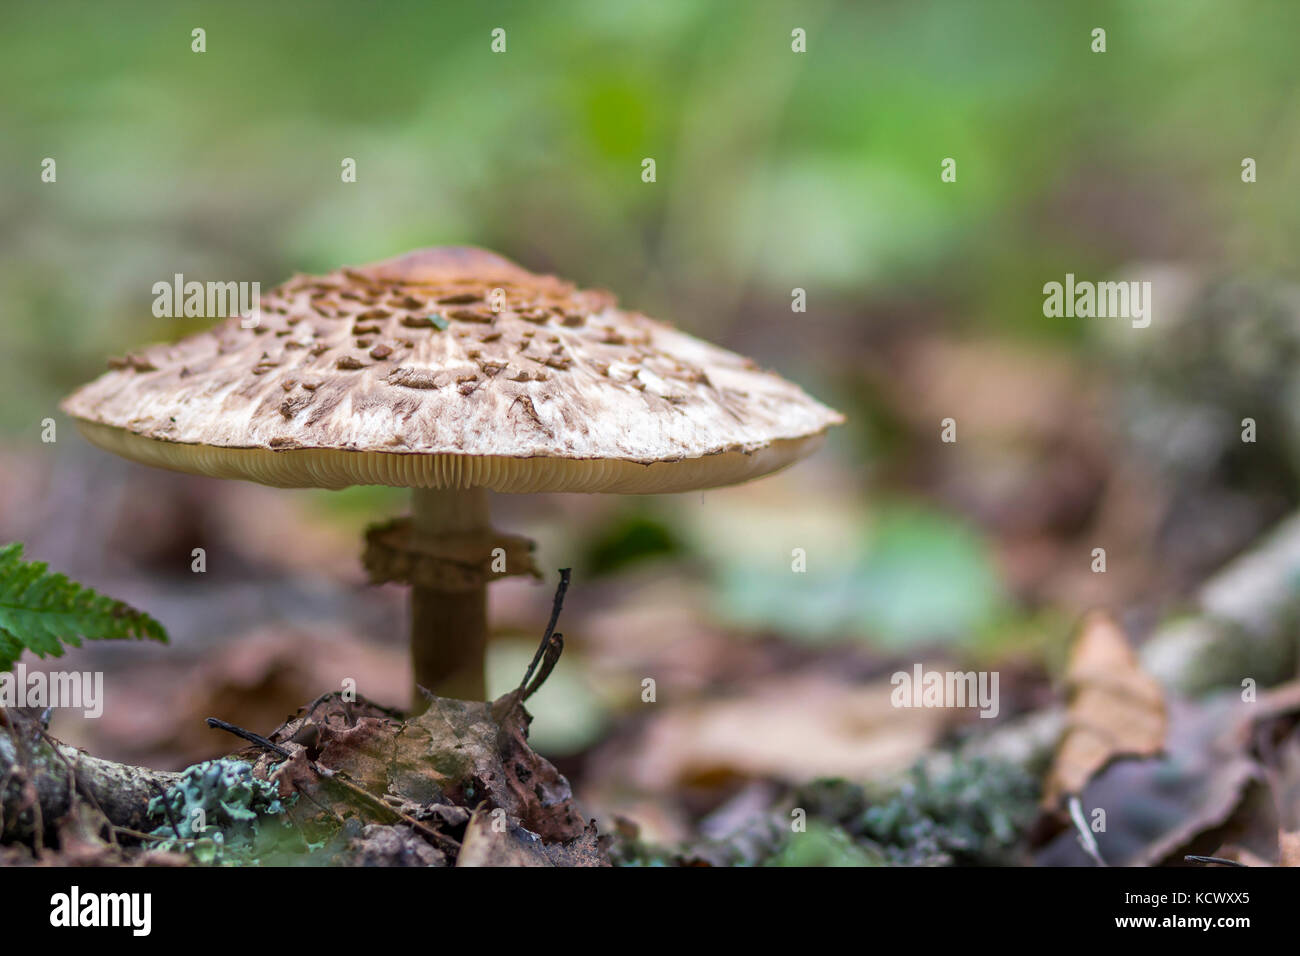 Big poisonous mushroom in forest macro Stock Photo